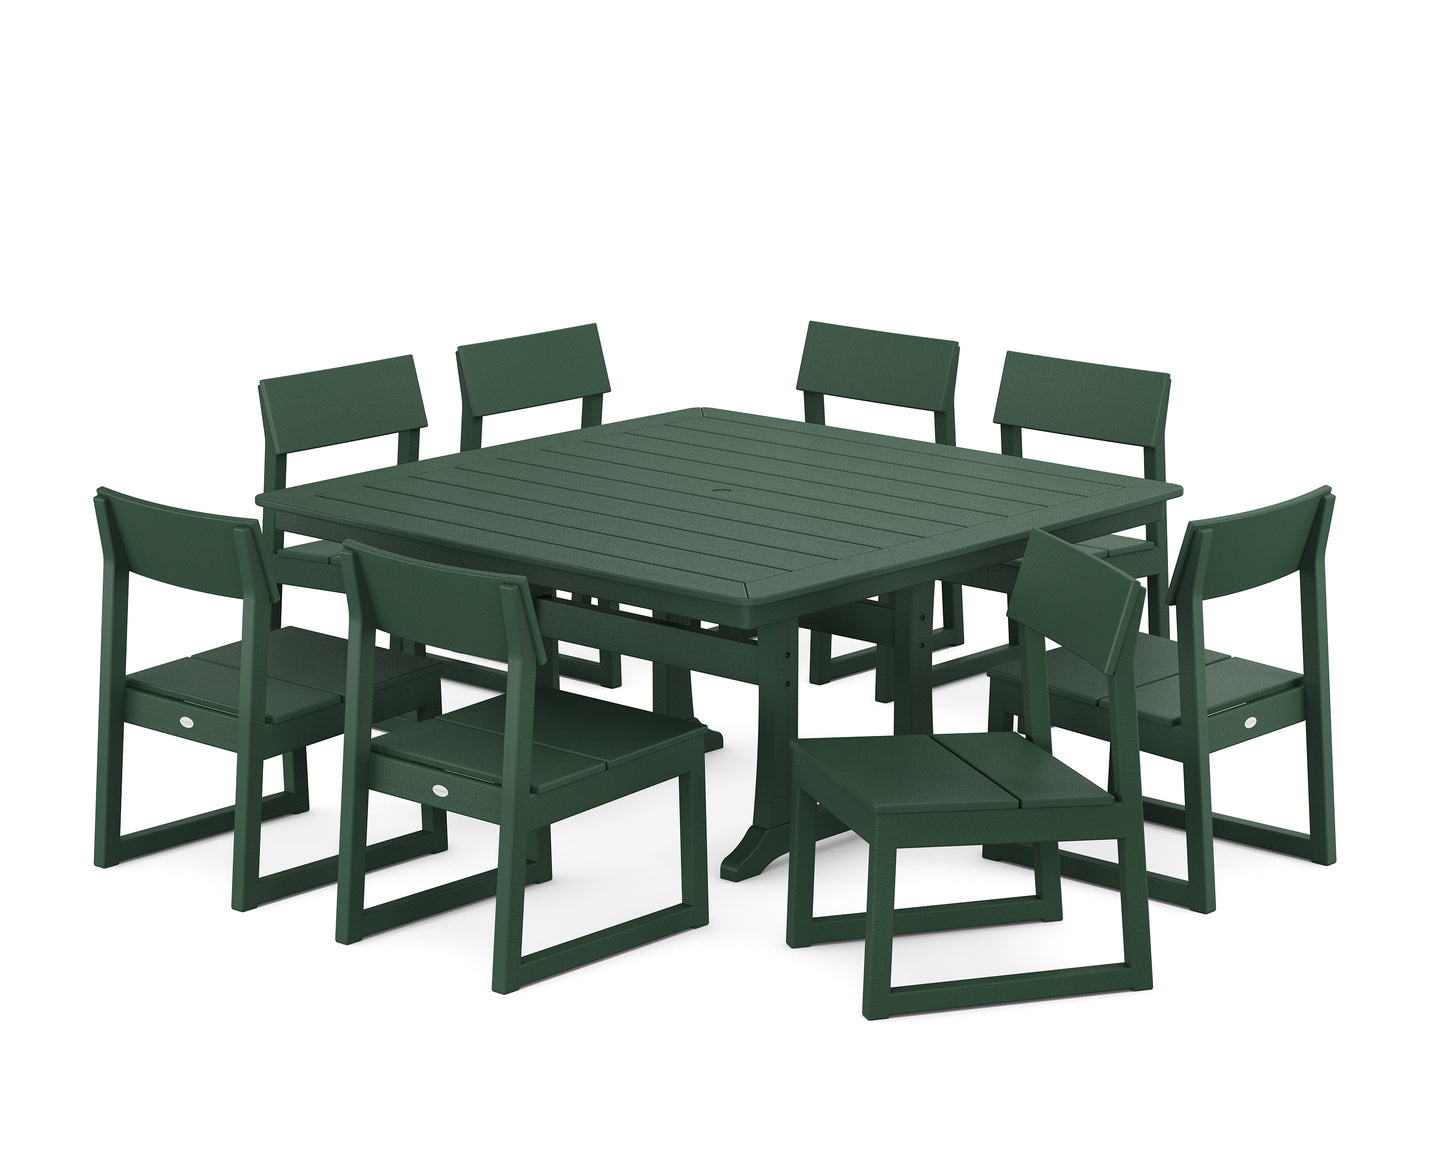 EDGE Side Chair 9-Piece Dining Set with Trestle Legs